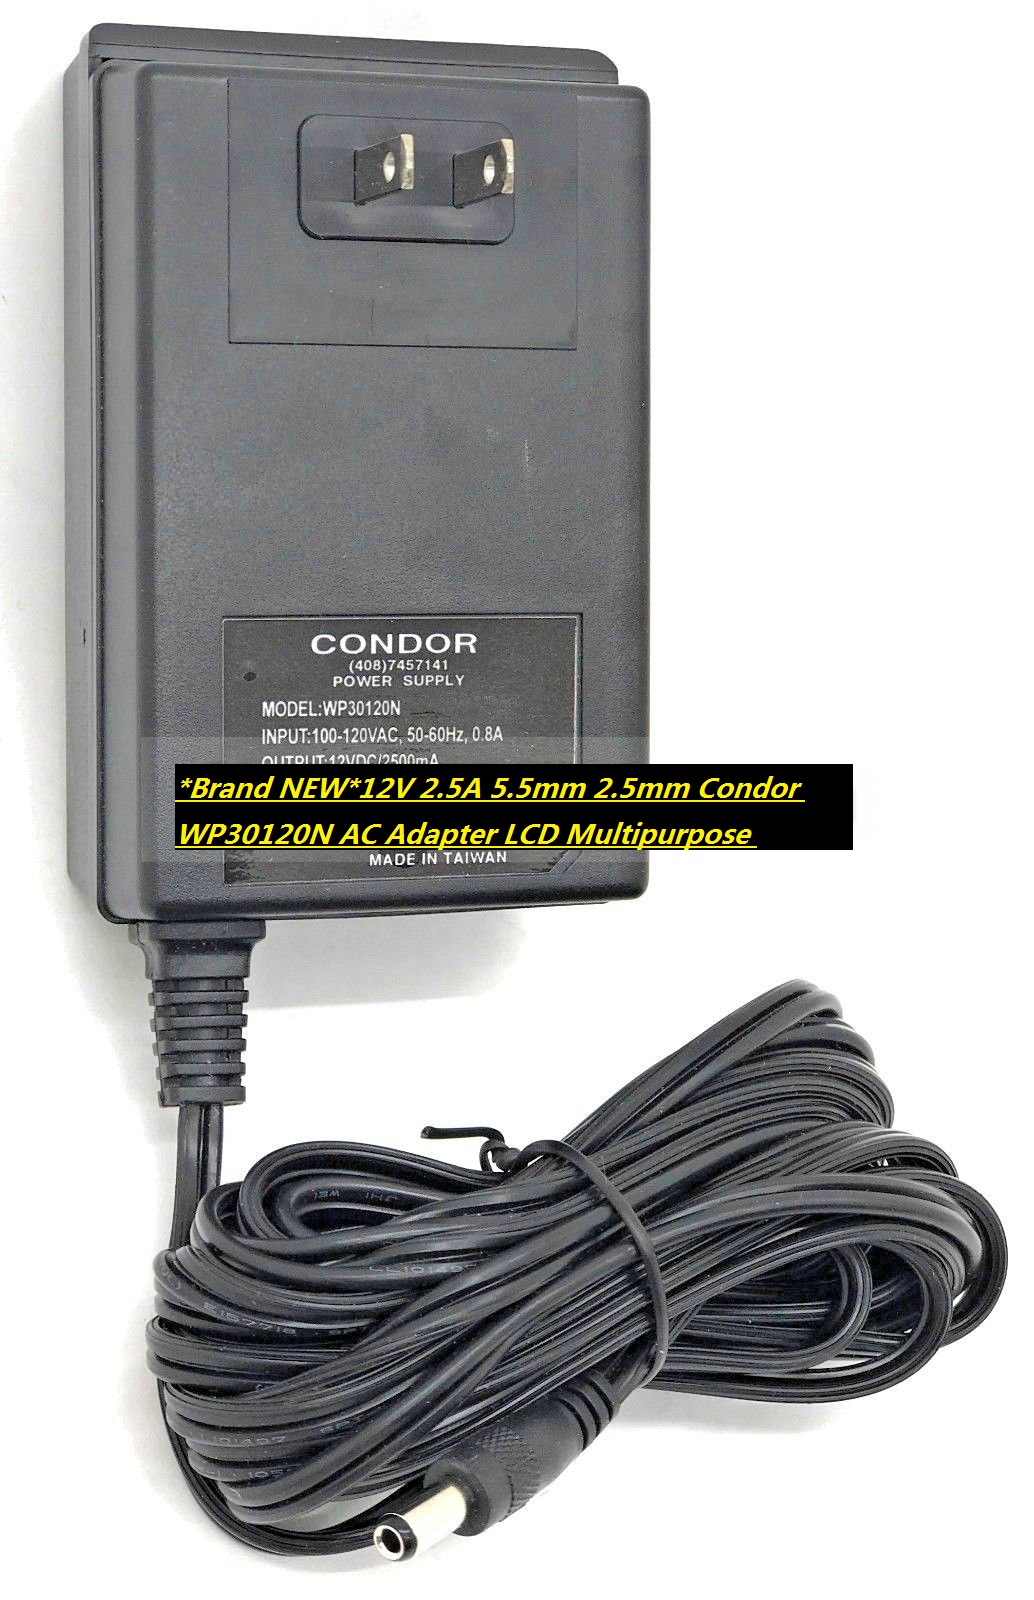 *Brand NEW*12V 2.5A 5.5mm 2.5mm Condor WP30120N AC Adapter LCD Multipurpose